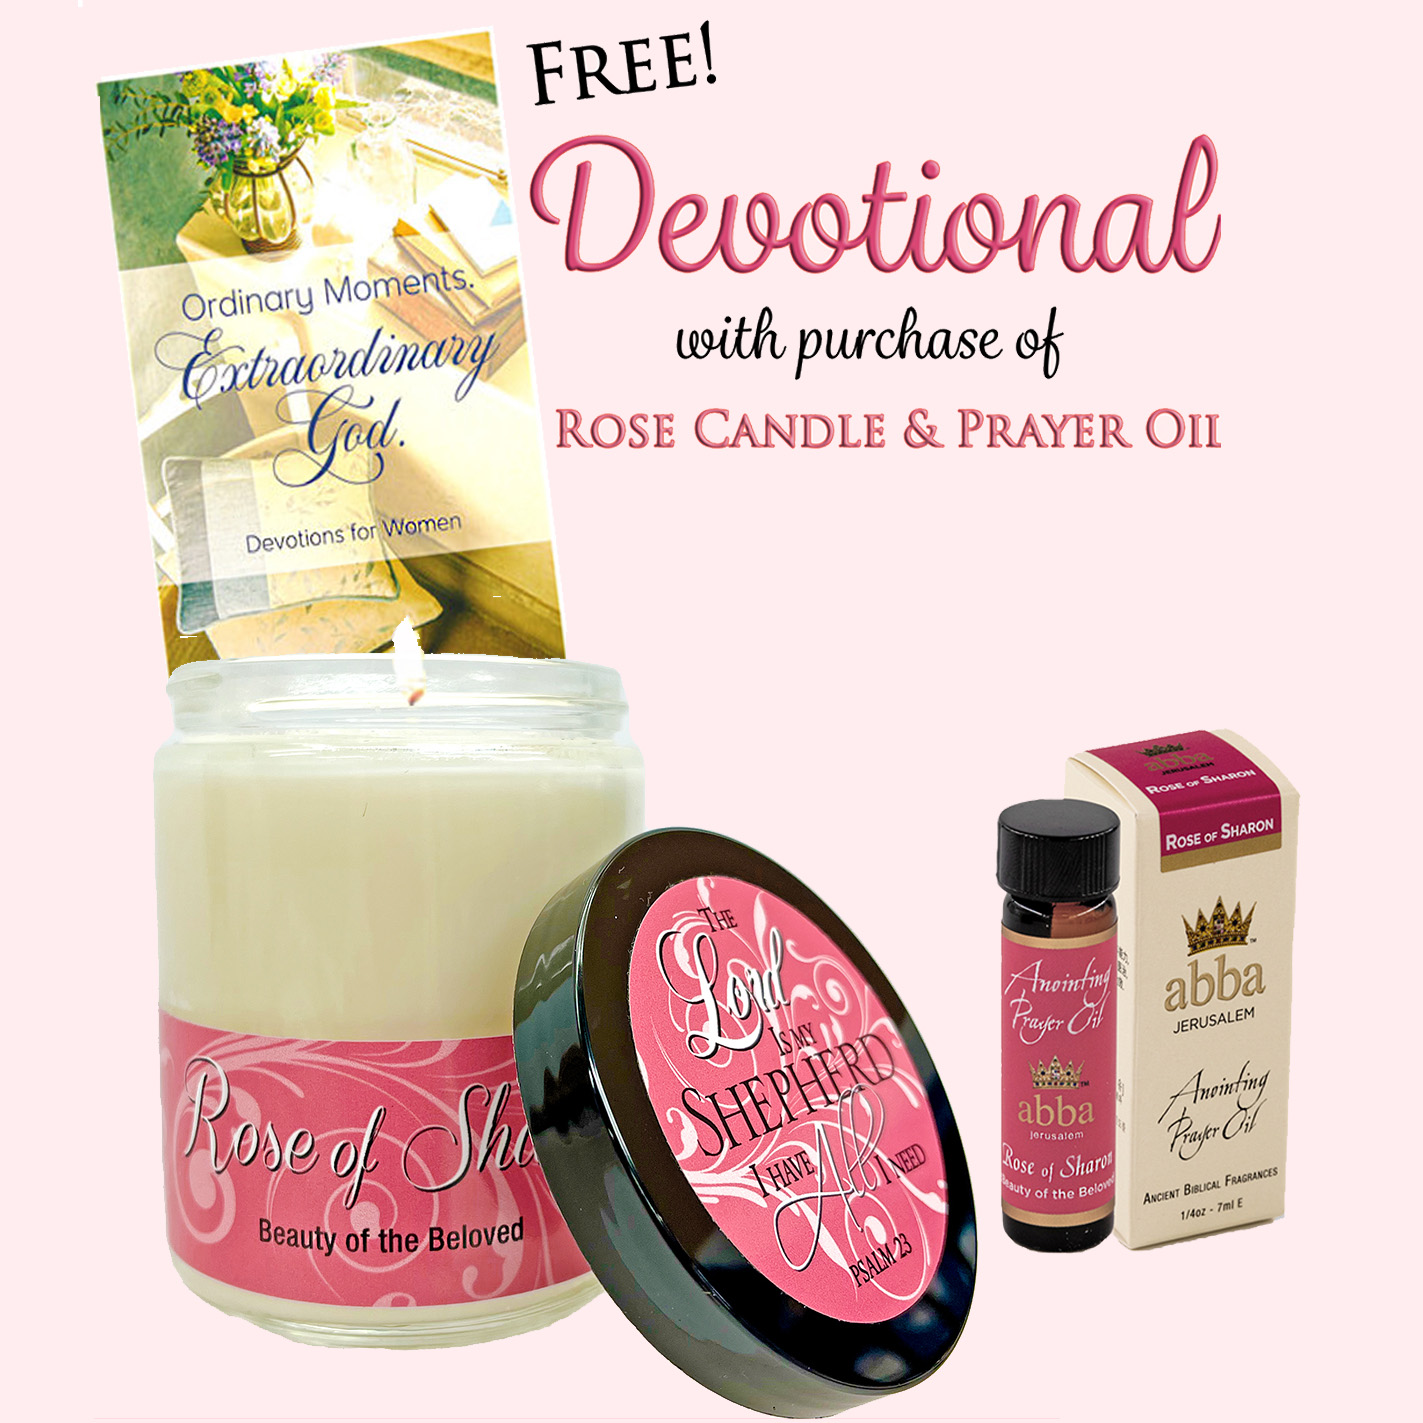 FREE DEVOTIONAL WITH PURCHASE OF ROSE CANDLE & OIL